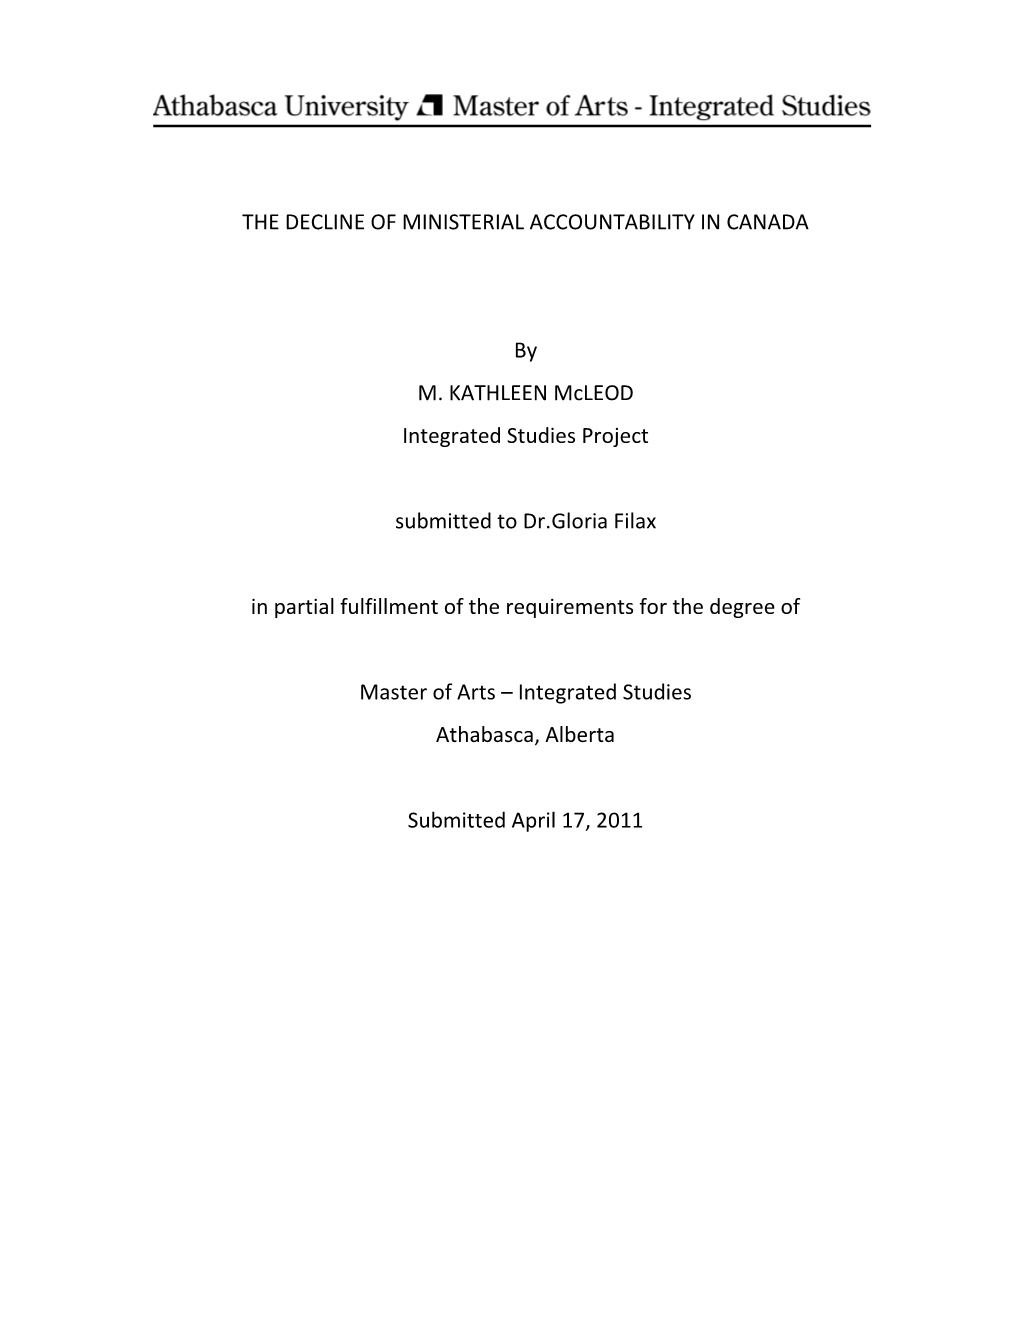 THE DECLINE of MINISTERIAL ACCOUNTABILITY in CANADA by M. KATHLEEN Mcleod Integrated Studies Project Submitted to Dr.Gloria